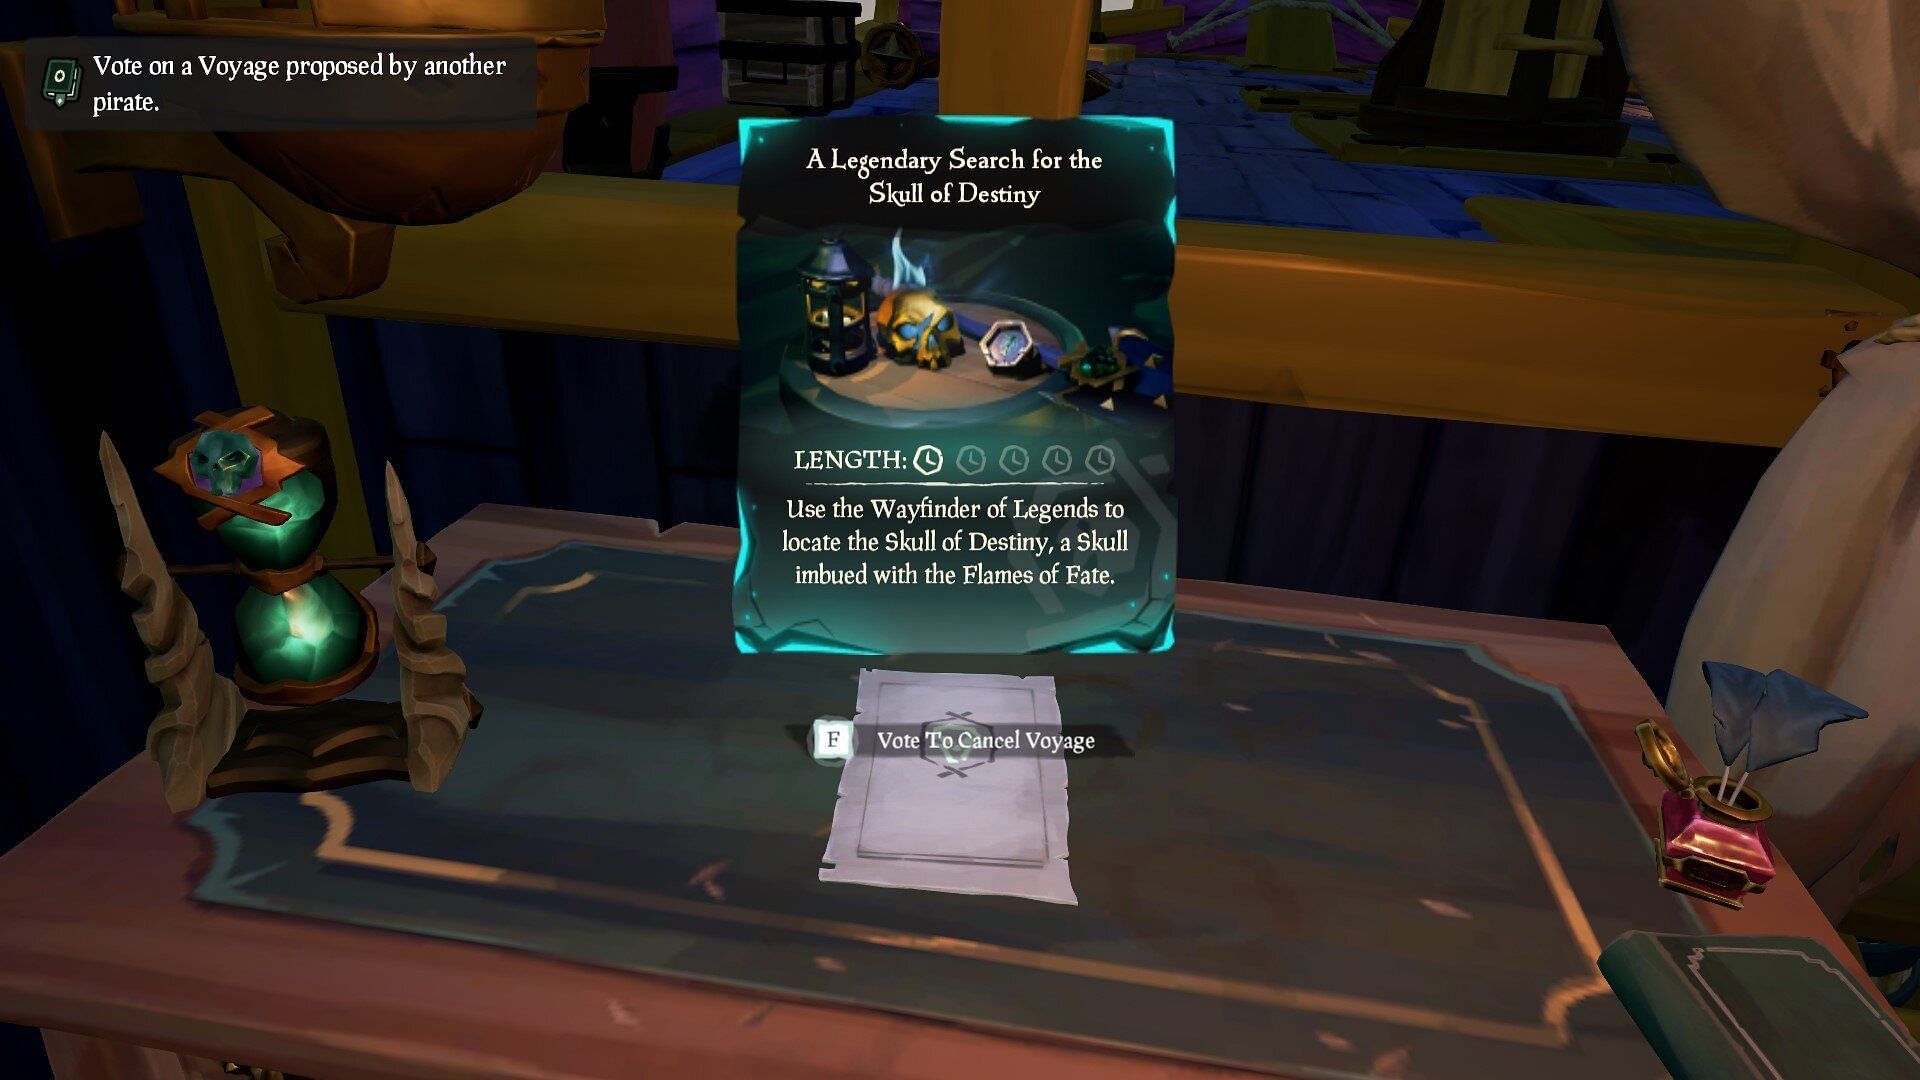 Voting for a Voyage to find the Skull of Destiny on the new Quest table. (Image via Rare)